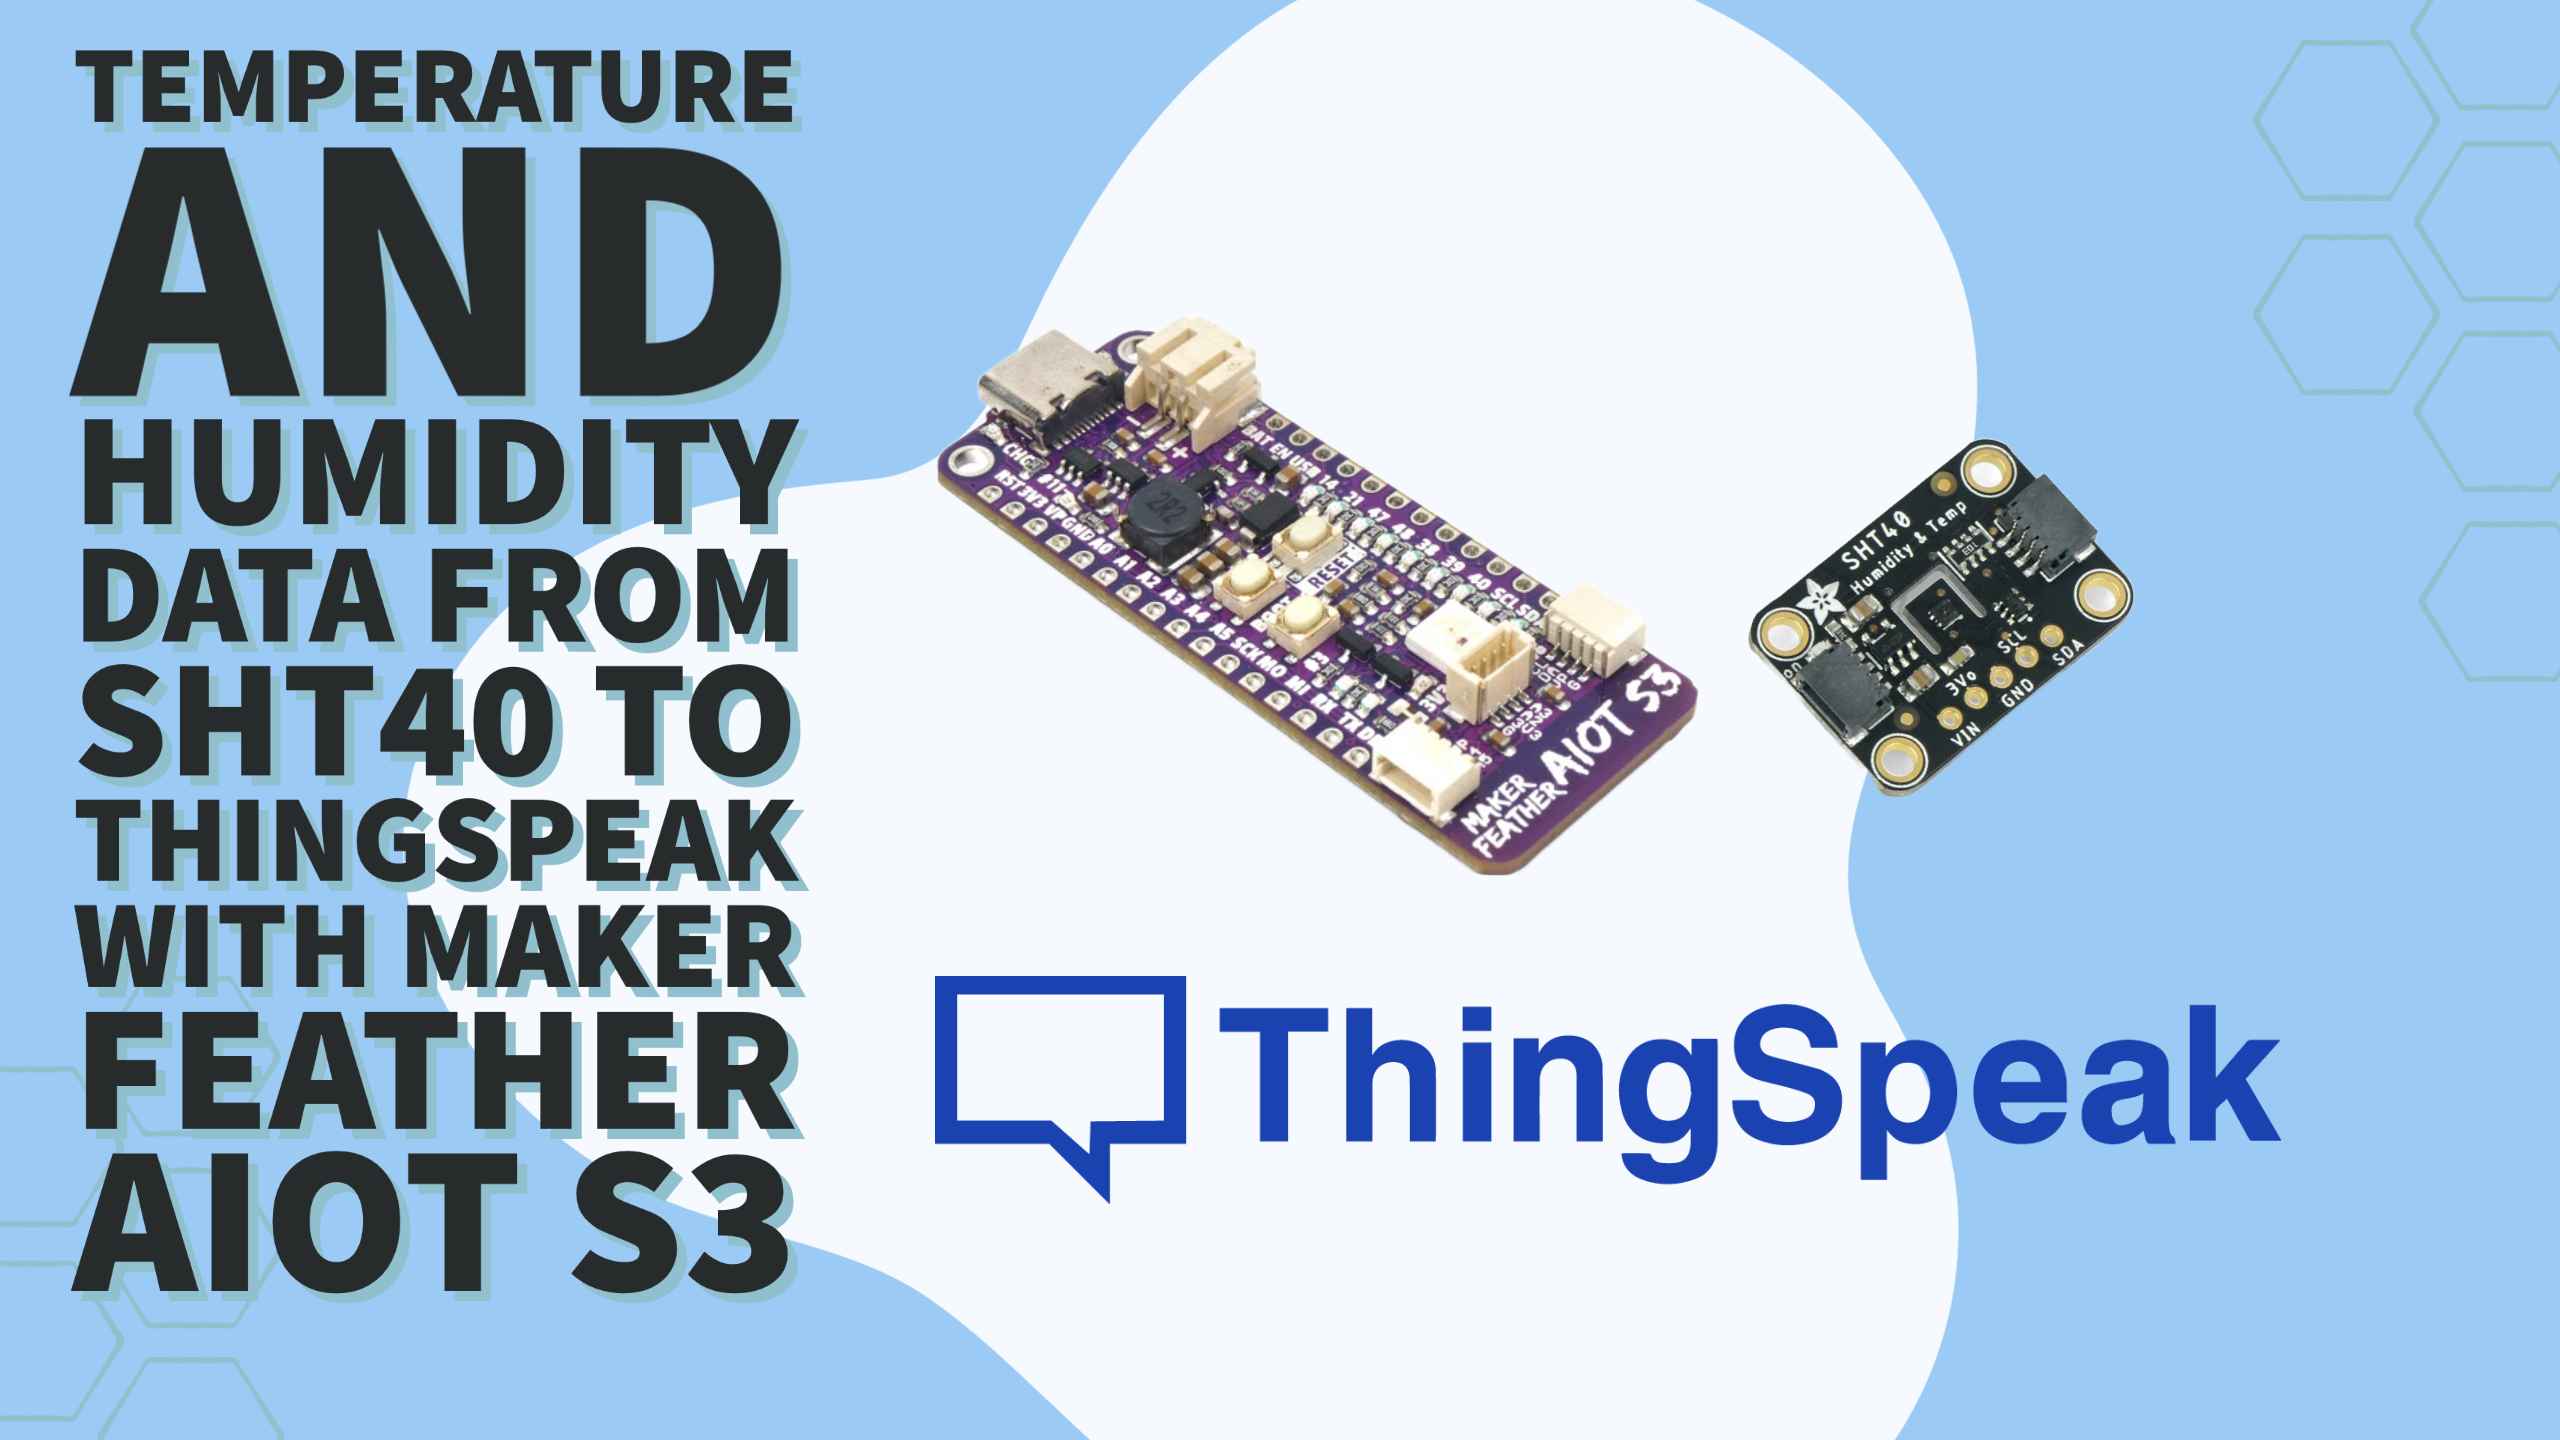 Temperature And Humidity Data From SHT40 To Thingspeak With Maker Feather AIOT S3